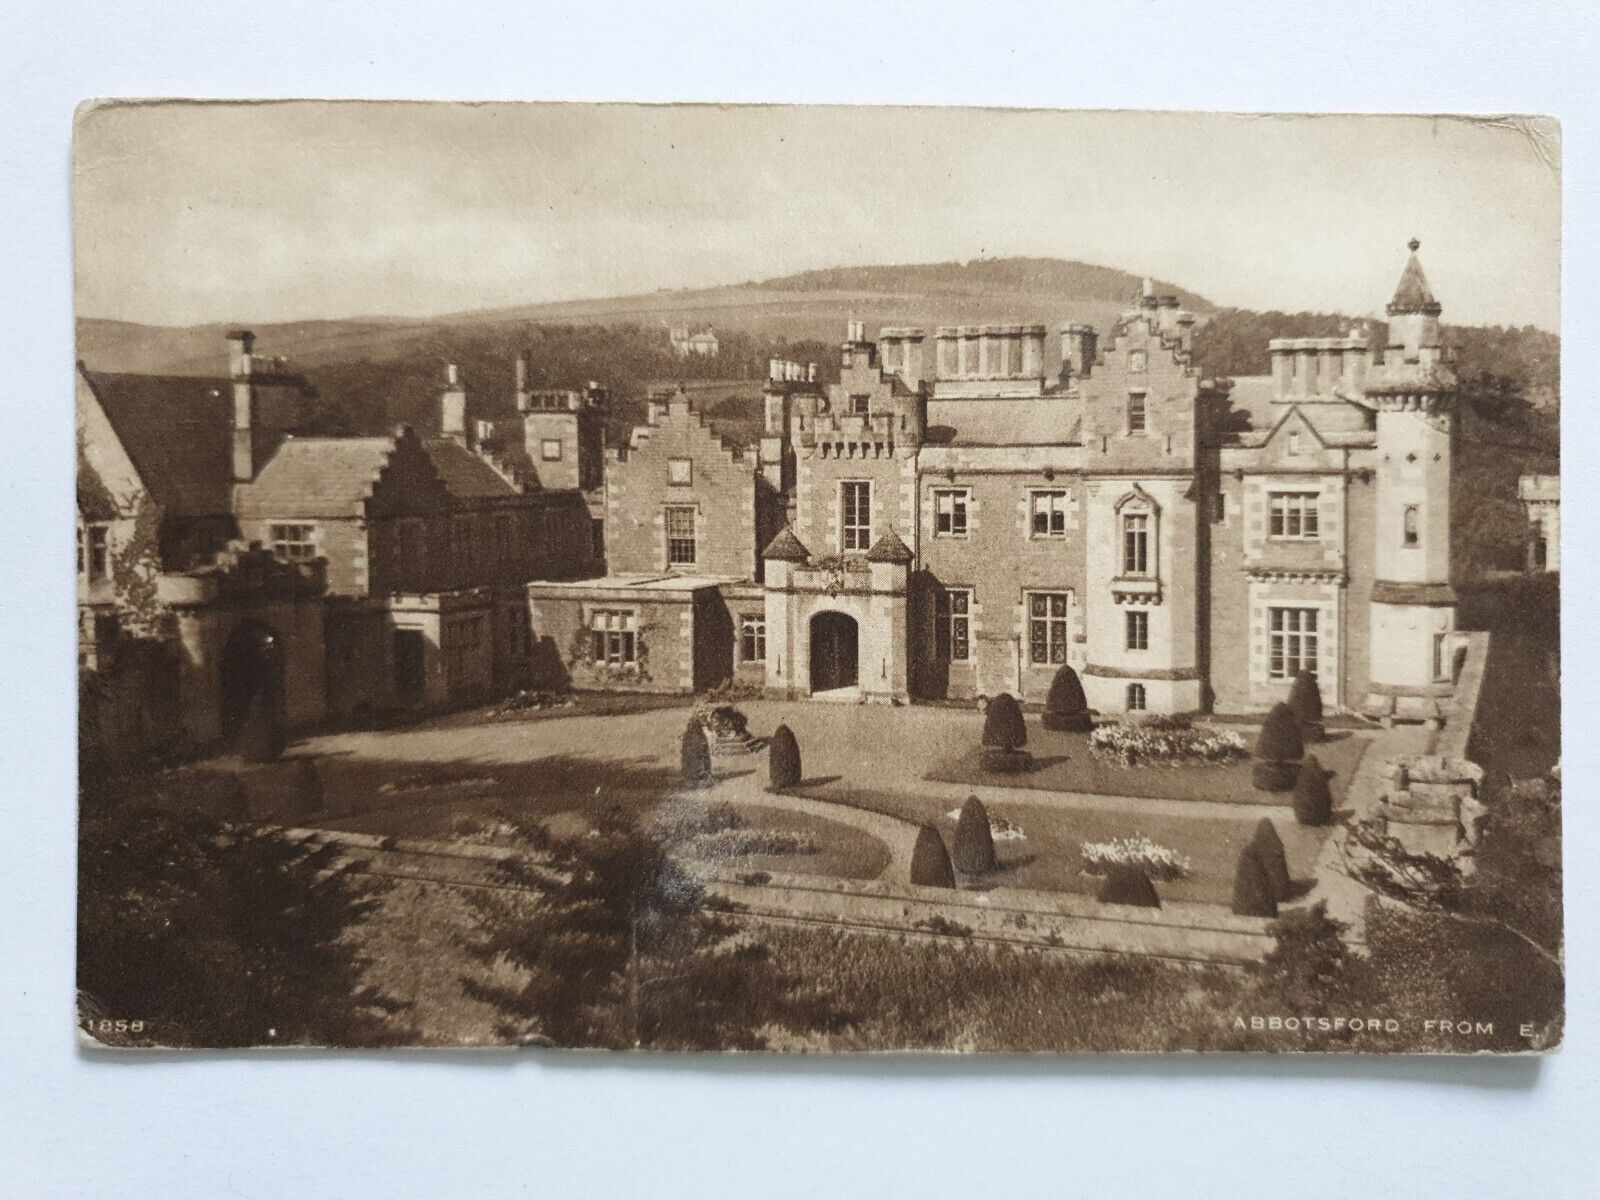 House Clearance - Abbotsford From the East, Galashiels, Scotland, Old Service 1930s